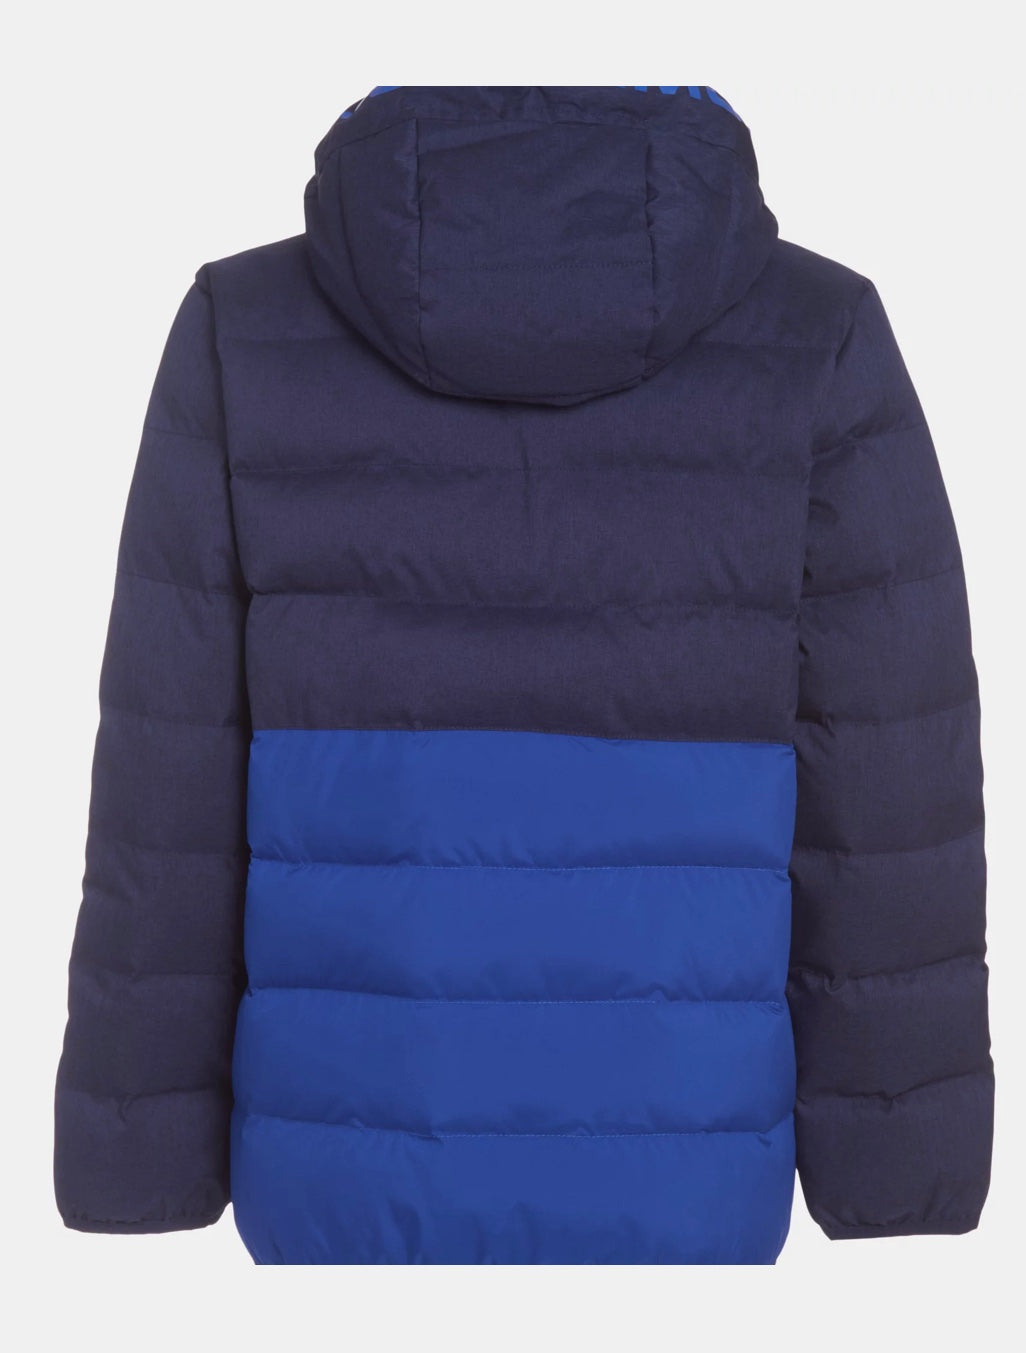 Under Armour Midnight Navy and Royal Blue Coat